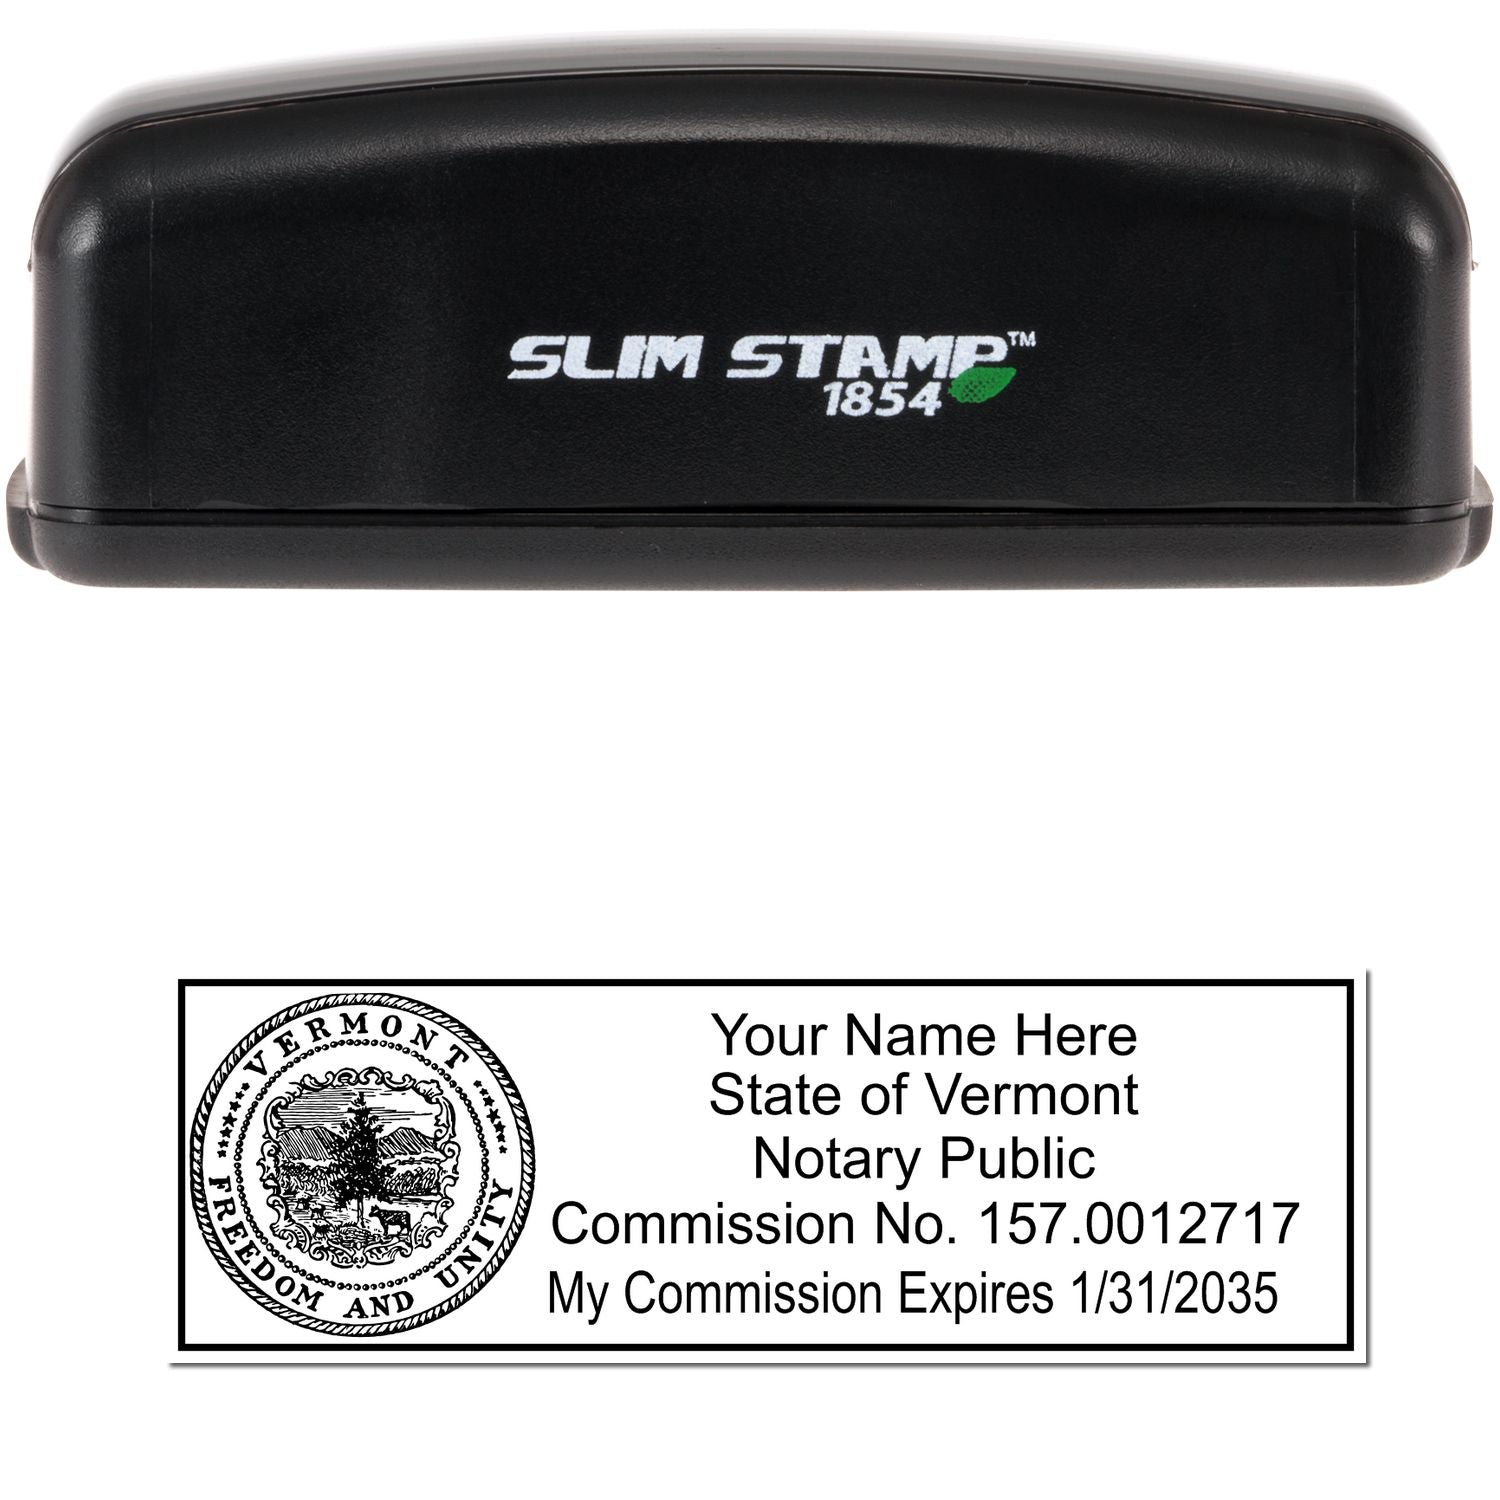 The main image for the Slim Pre-Inked State Seal Notary Stamp for Vermont depicting a sample of the imprint and electronic files